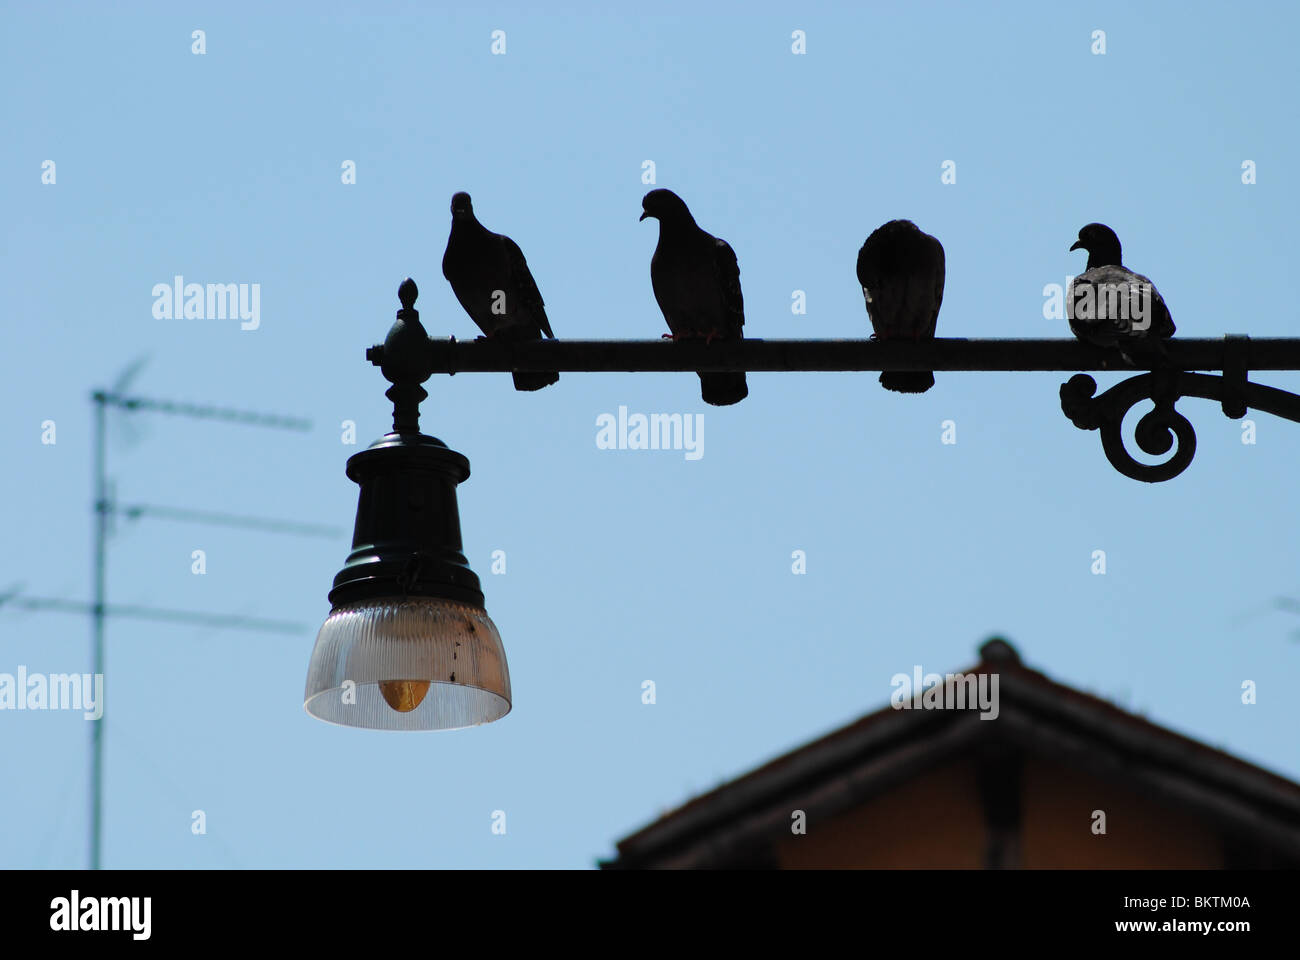 Pigeons perched on a lamp post, Venice, Italy Stock Photo